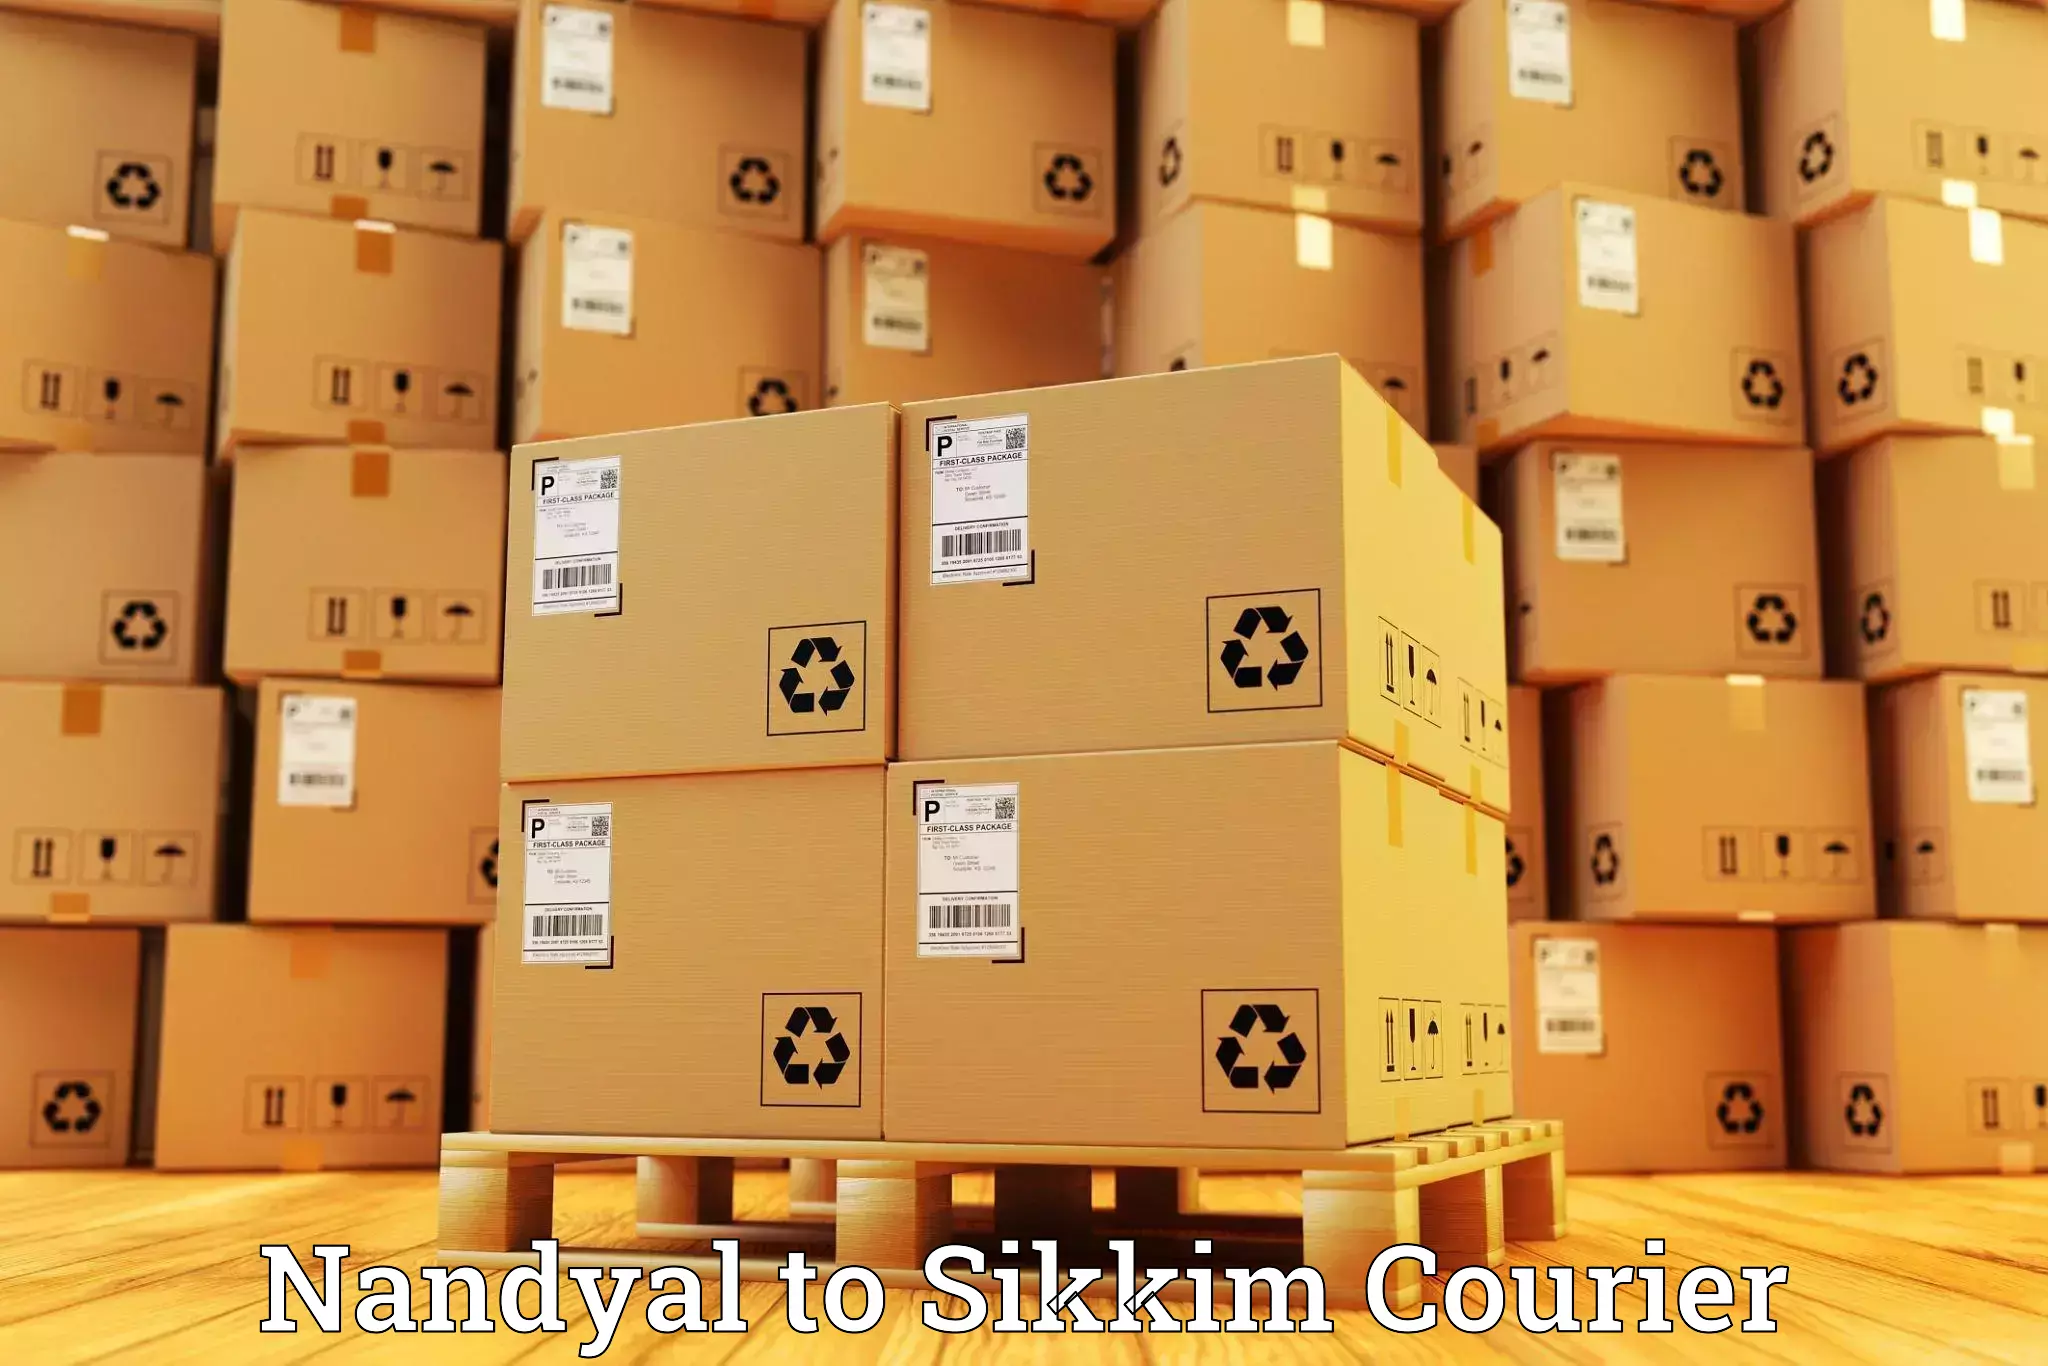 State-of-the-art courier technology Nandyal to Rangpo